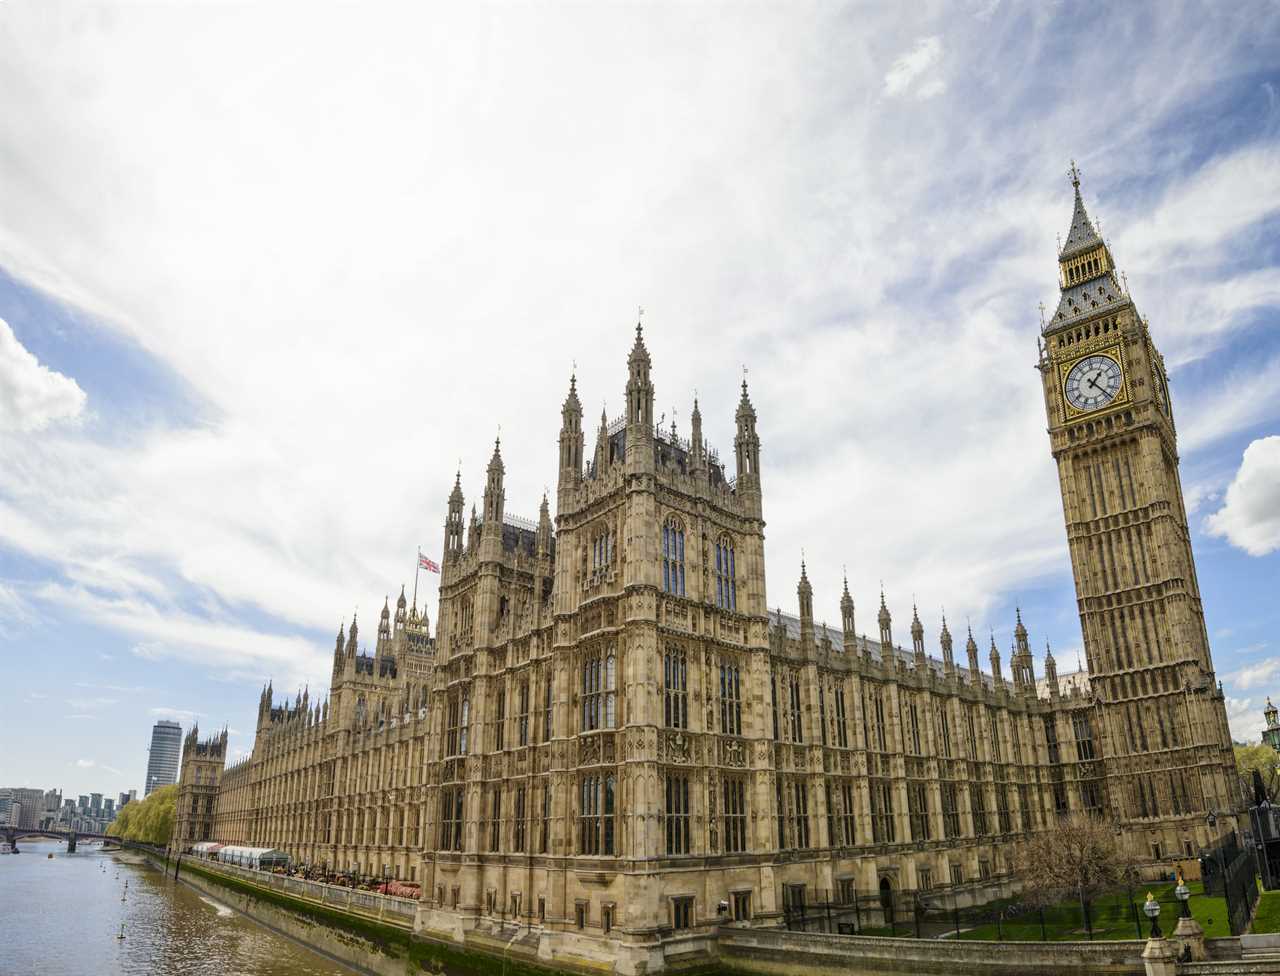 Two drug dealers nicked in Parliament as hundreds of crimes recorded at home of democracy